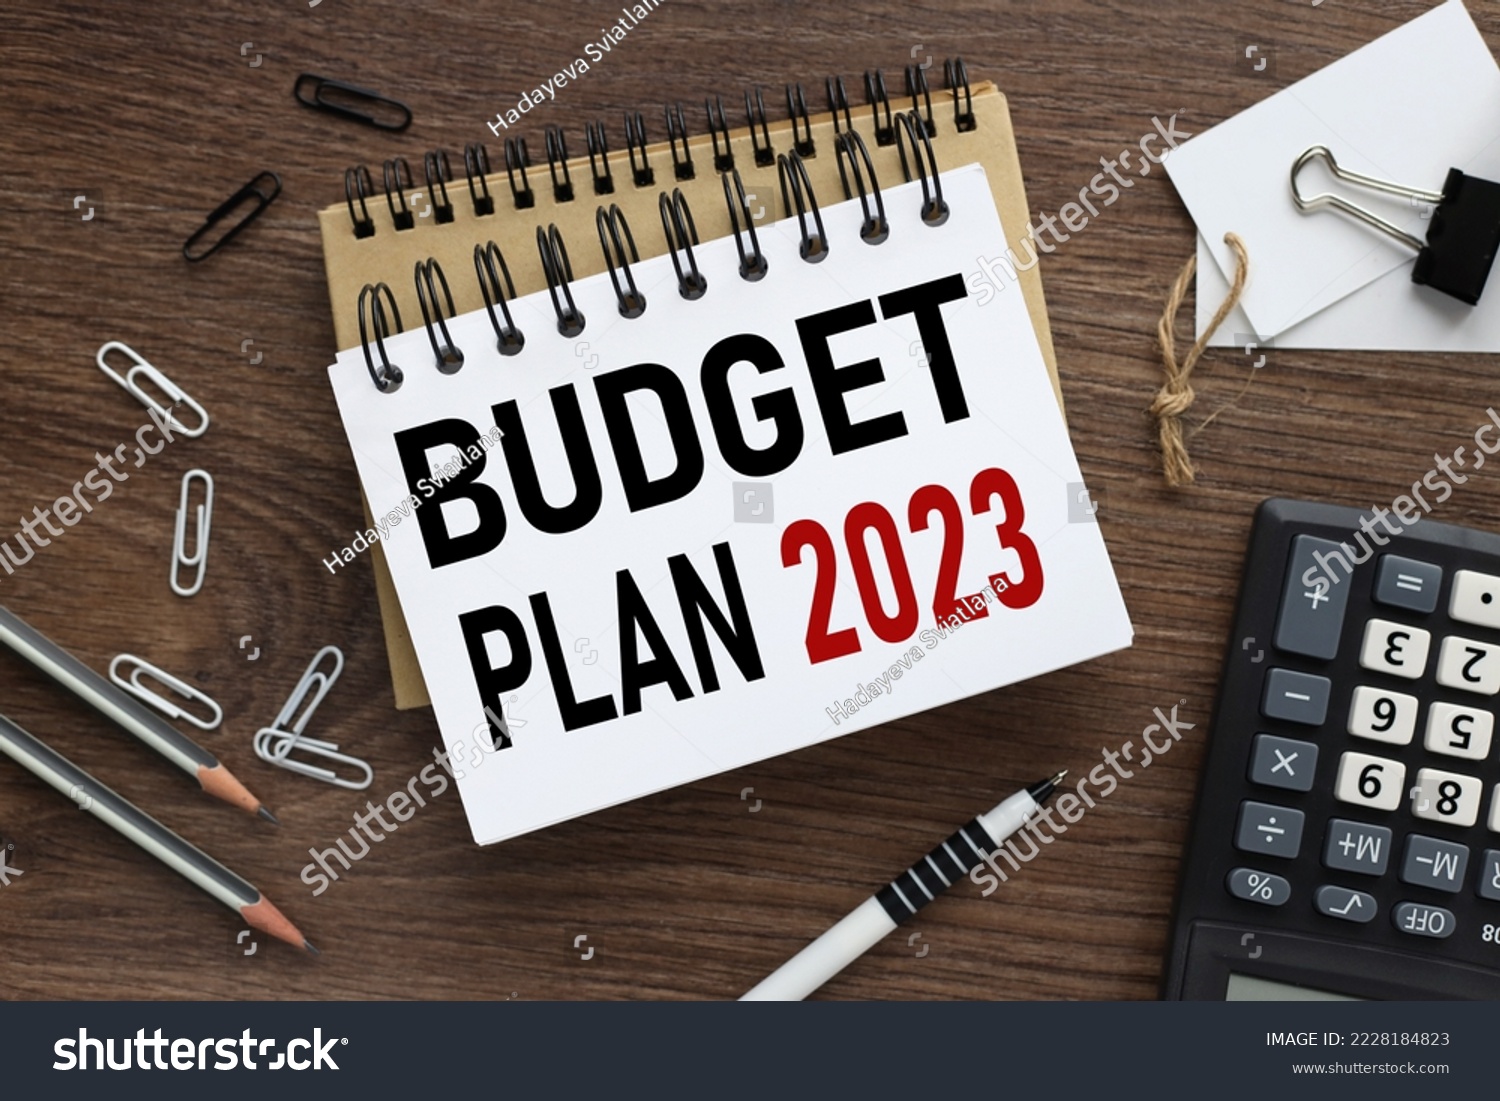 Business concept of planning 2023. top view of work desk and text on open notepad. New year business plan concept in 2023. Economy and business. BUDGET PLAN 2023 #2228184823